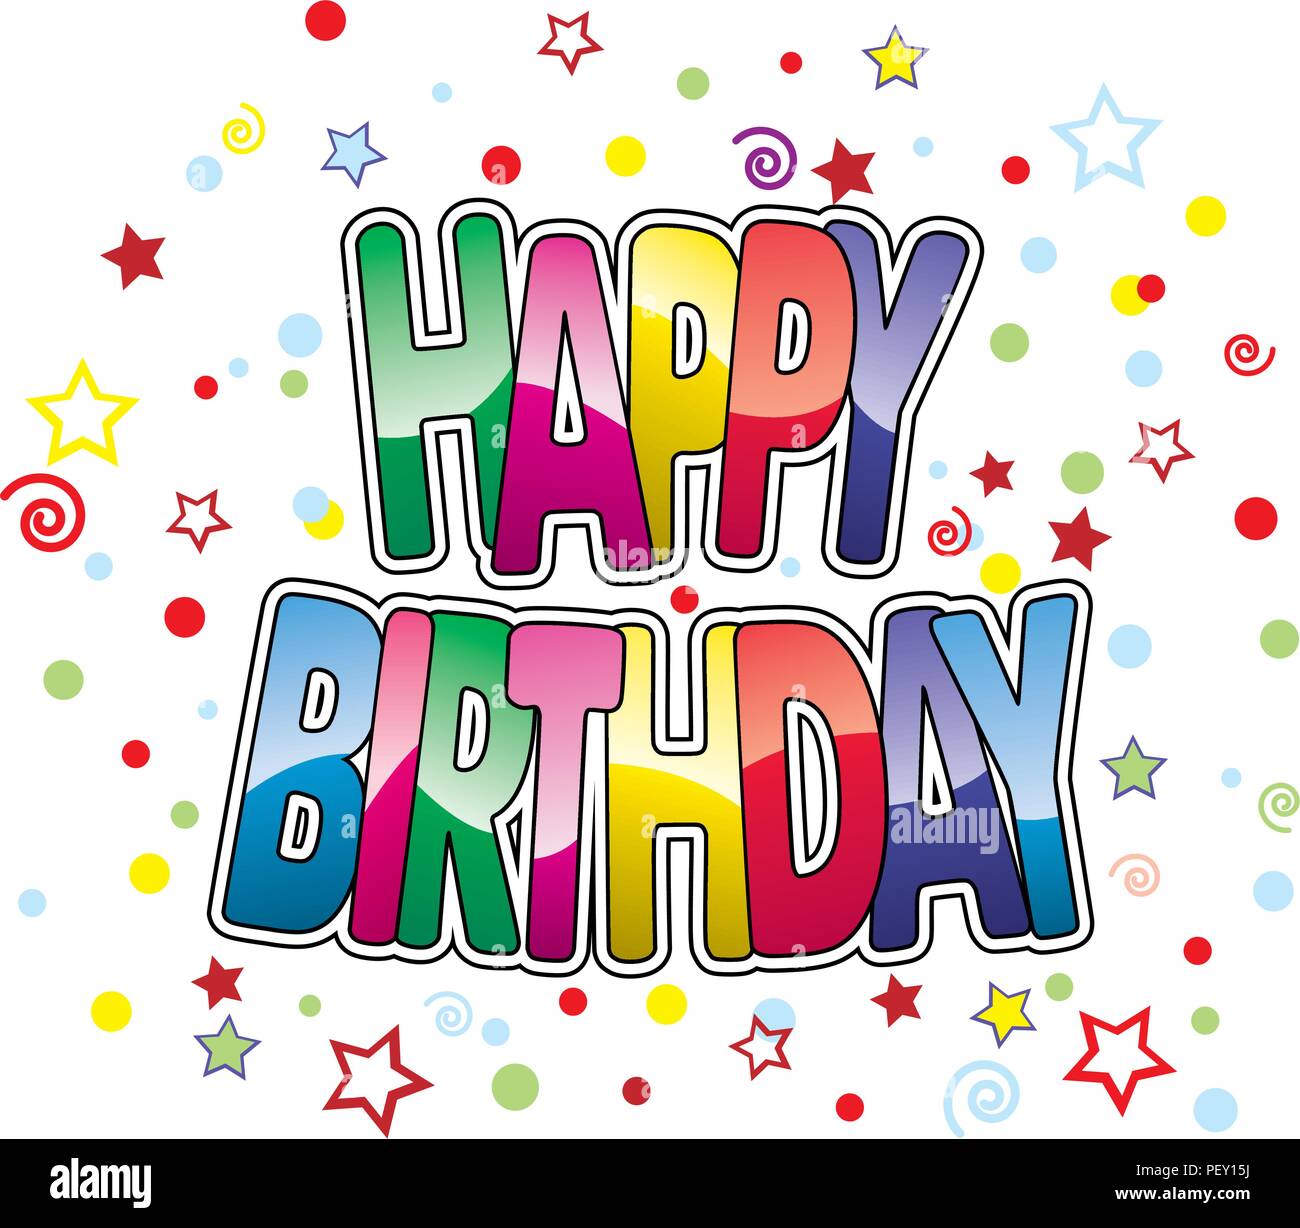 vector happy birthday greeting card. colorful text banner isolated on ...